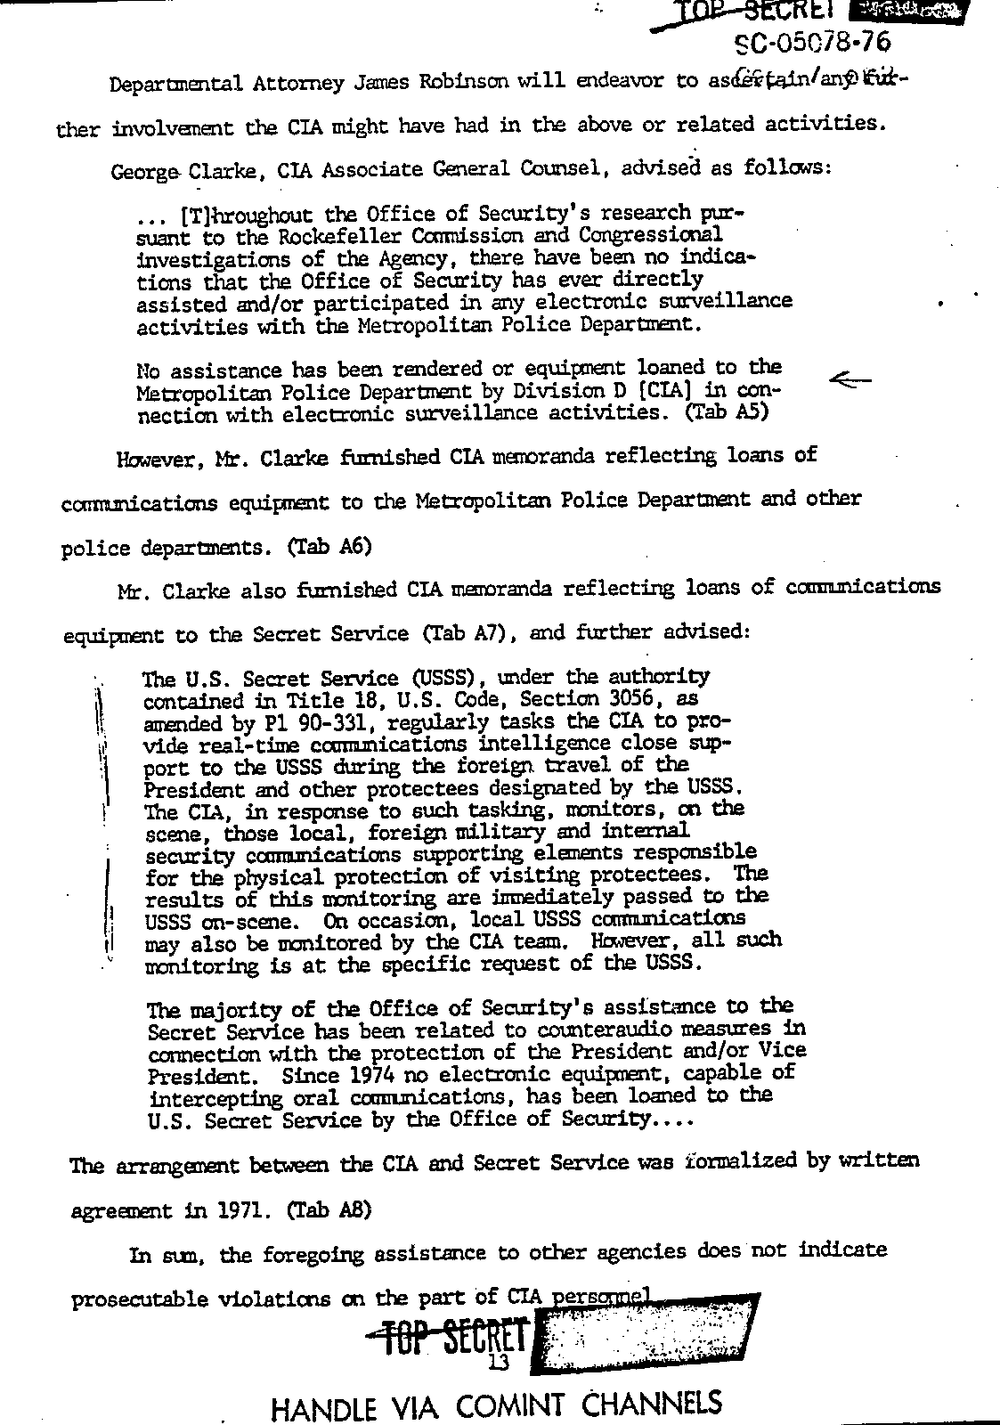 Page 21 from Report on Inquiry Into CIA Related Electronic Surveillance Activities